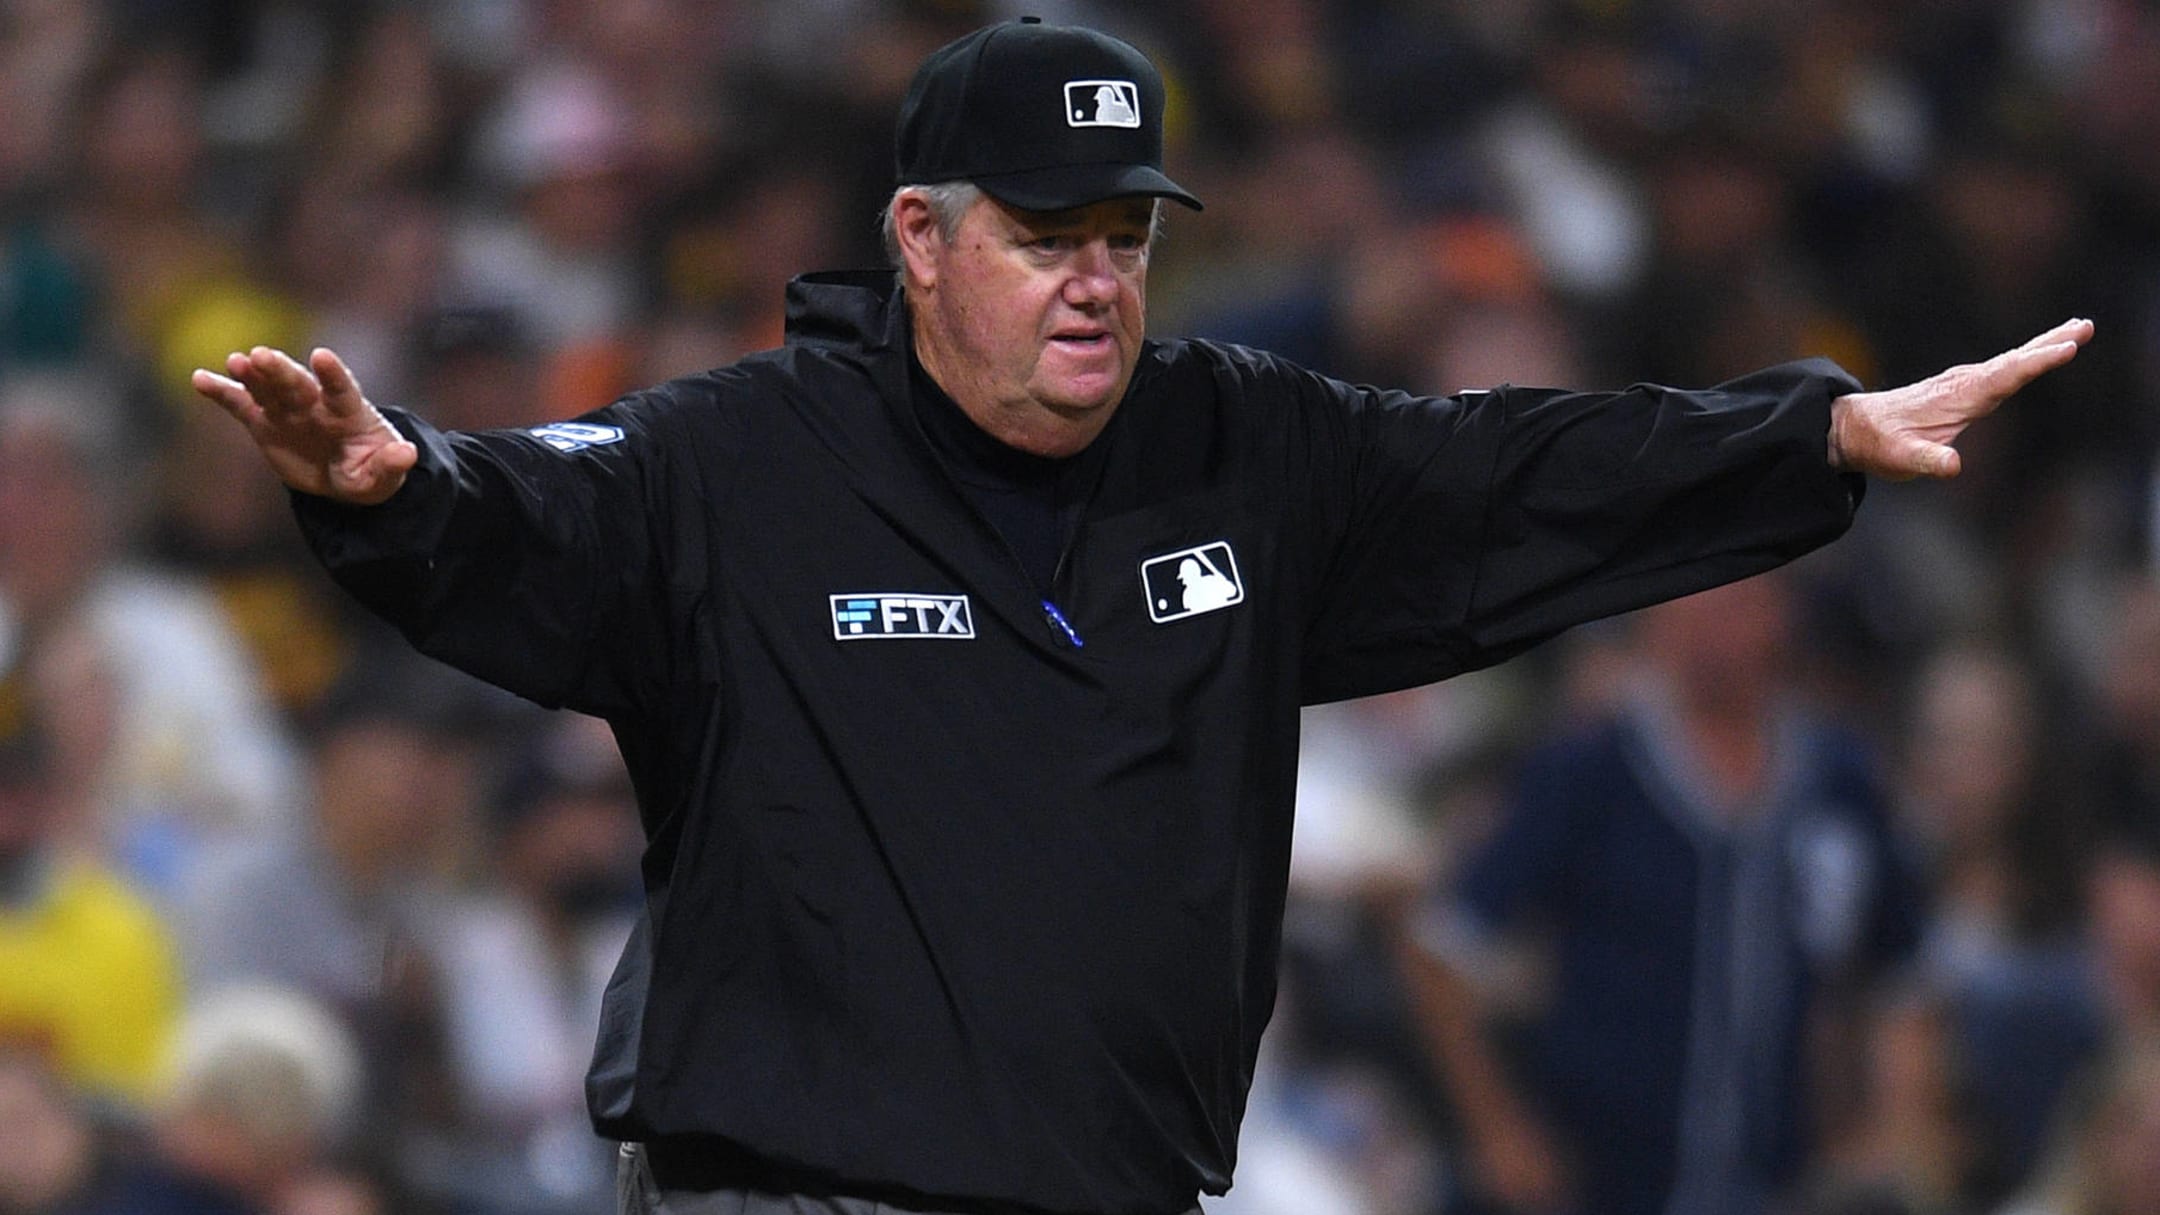 Retired MLB catcher Paul Lo Duca gets sued by umpire Joe West for